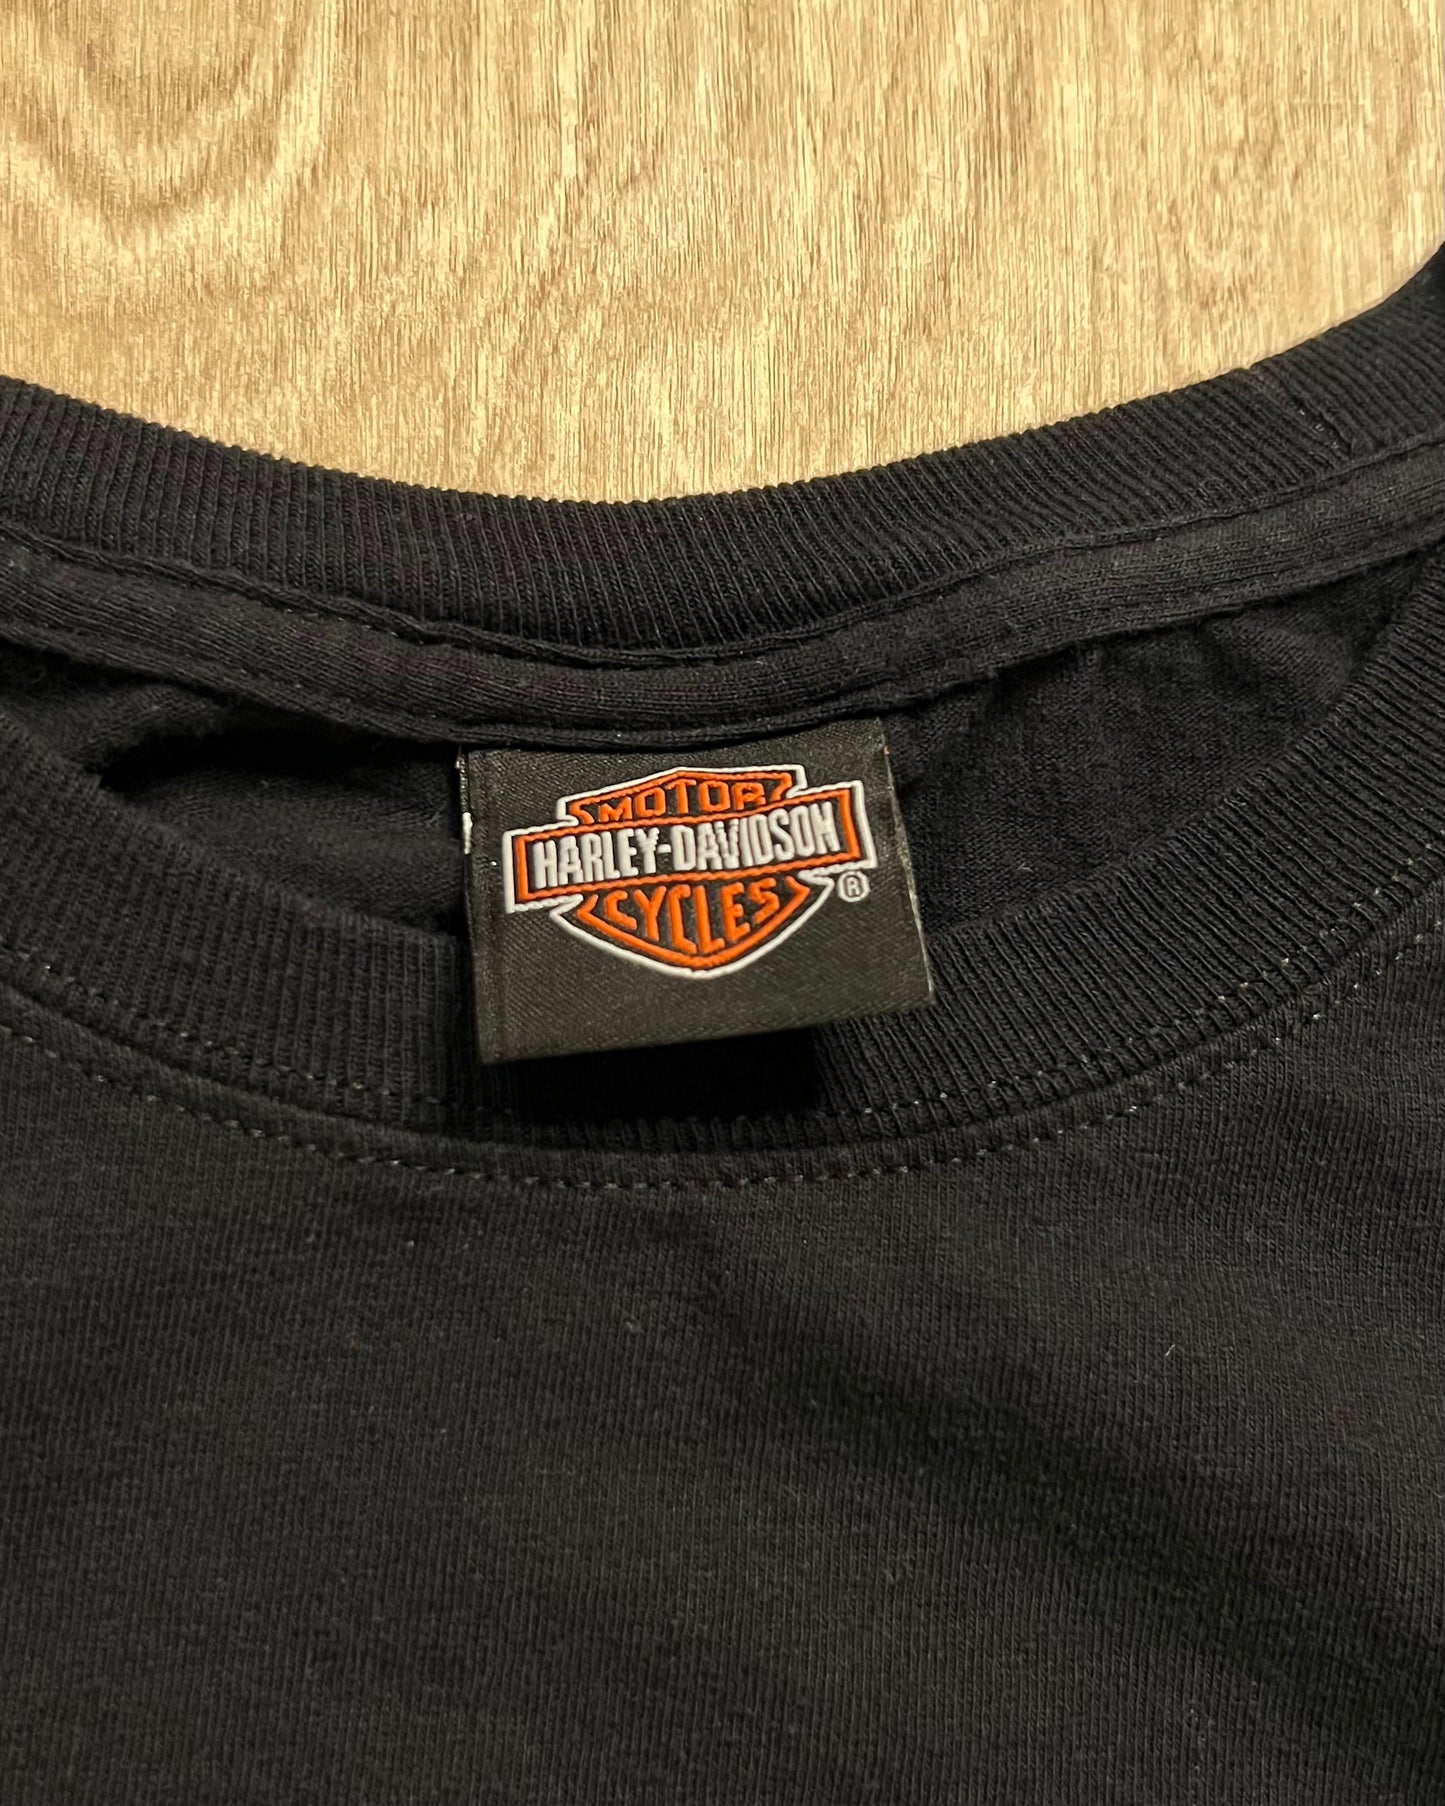 2000's Harley Davidson "Life Begins When You Get One" T-Shirt